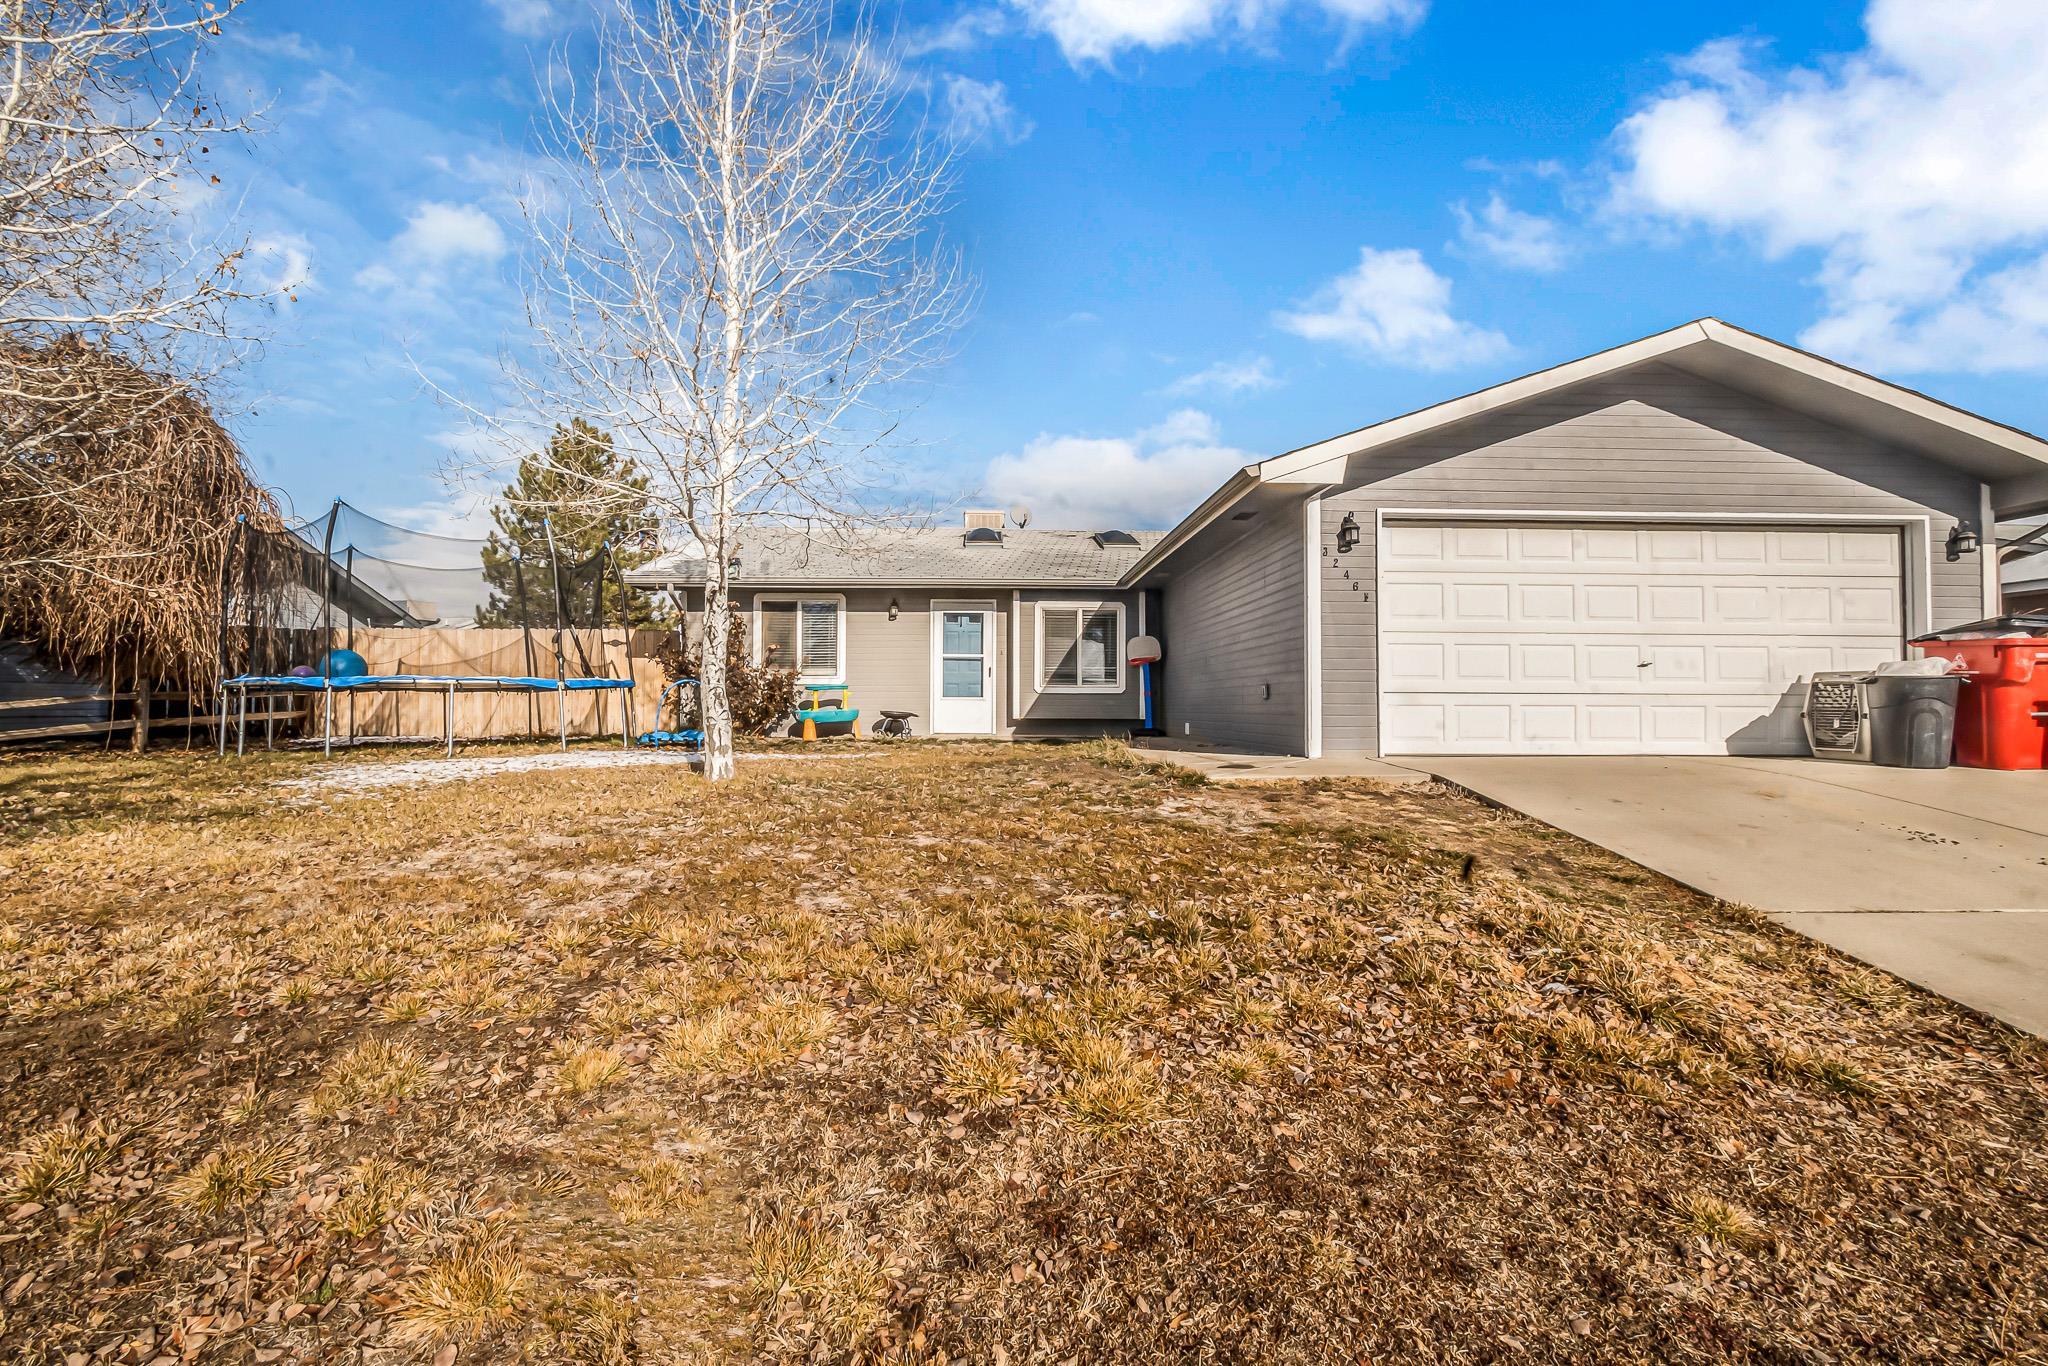 Freshly updated home! This 3 bedroom, 2 bathroom home has new appliances, flooring, water heater, counters, and paint throughout! You can feel the warmth of the updates as soon as you walk in the door. Schedule your showing today!